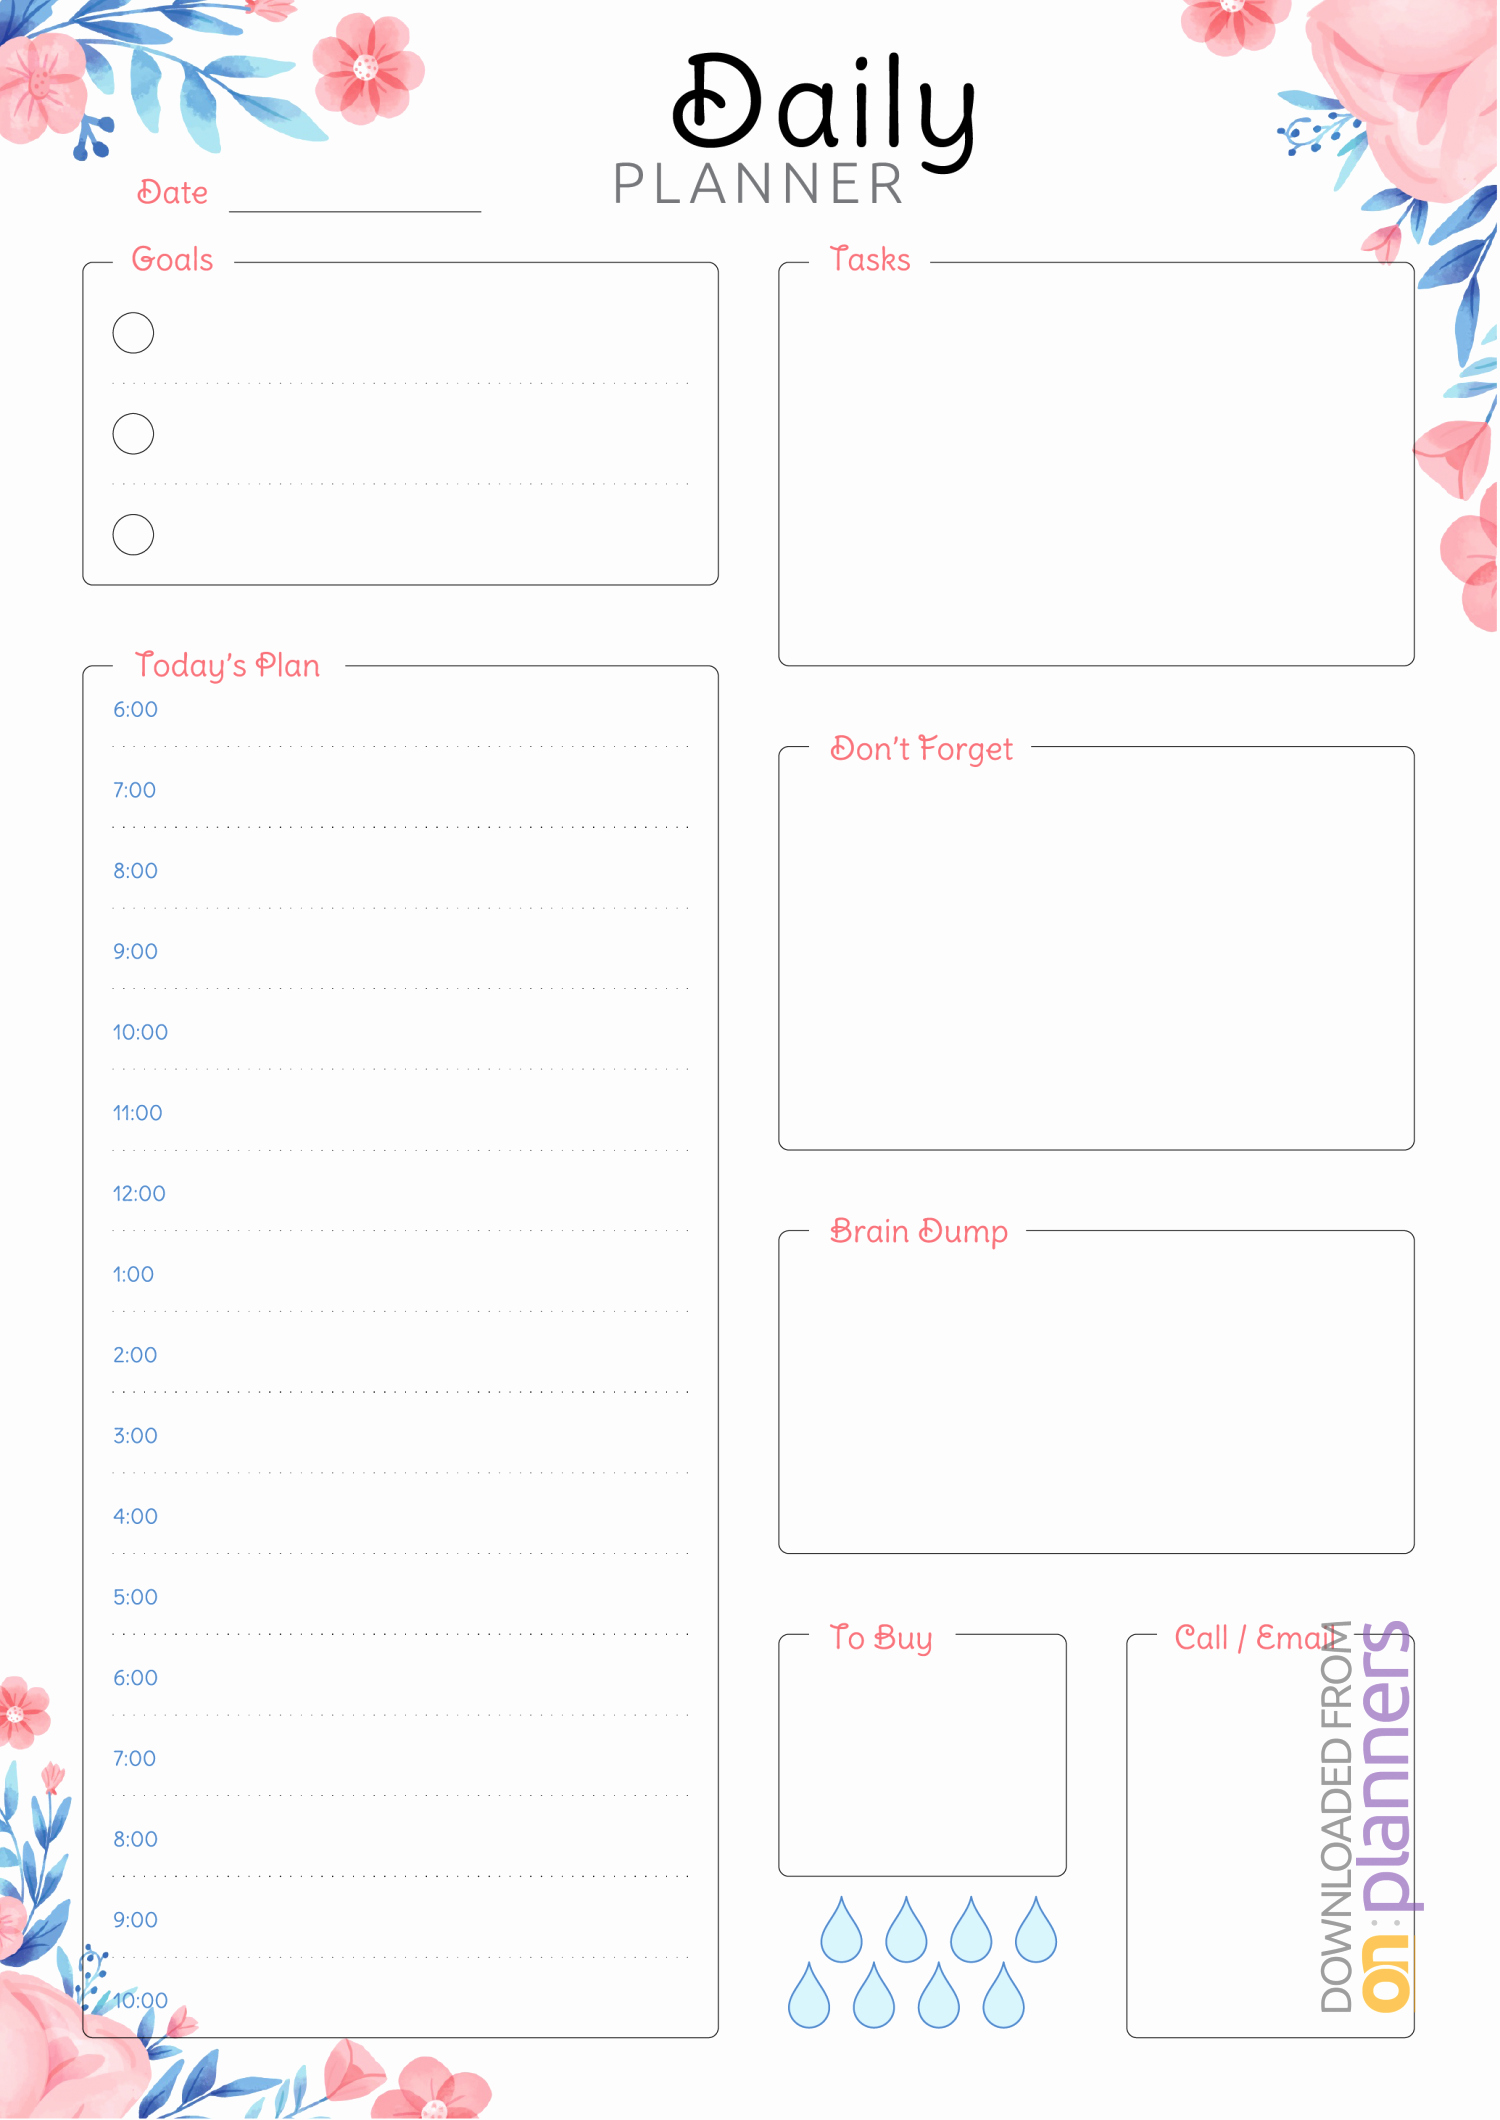 Daily Planner Printable Template Inspirational Daily Planner Templates Printable Download Free Pdf